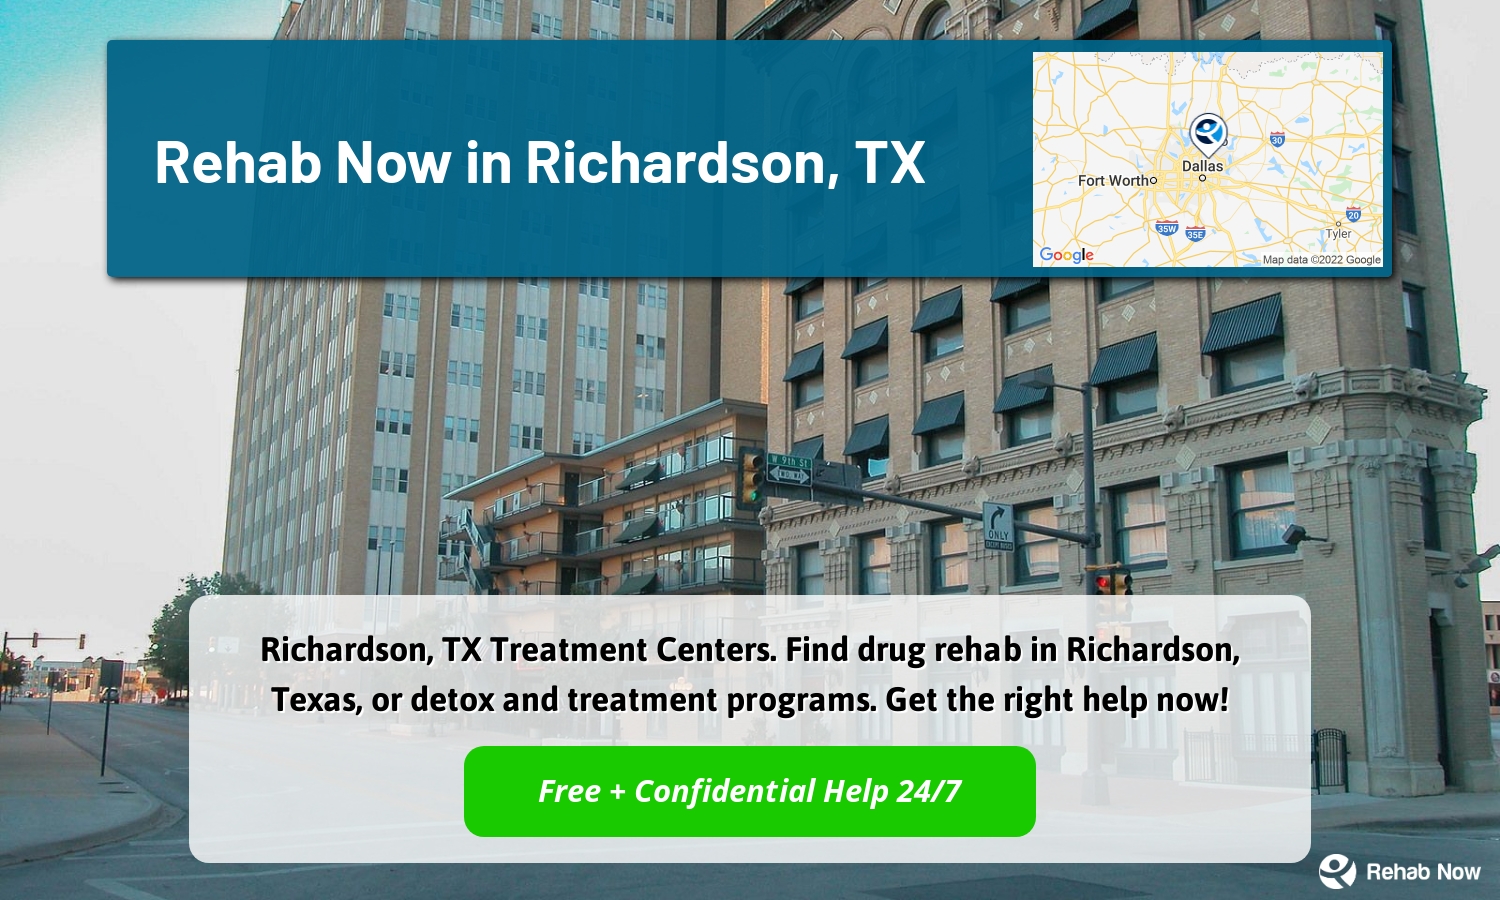 Richardson, TX Treatment Centers. Find drug rehab in Richardson, Texas, or detox and treatment programs. Get the right help now!